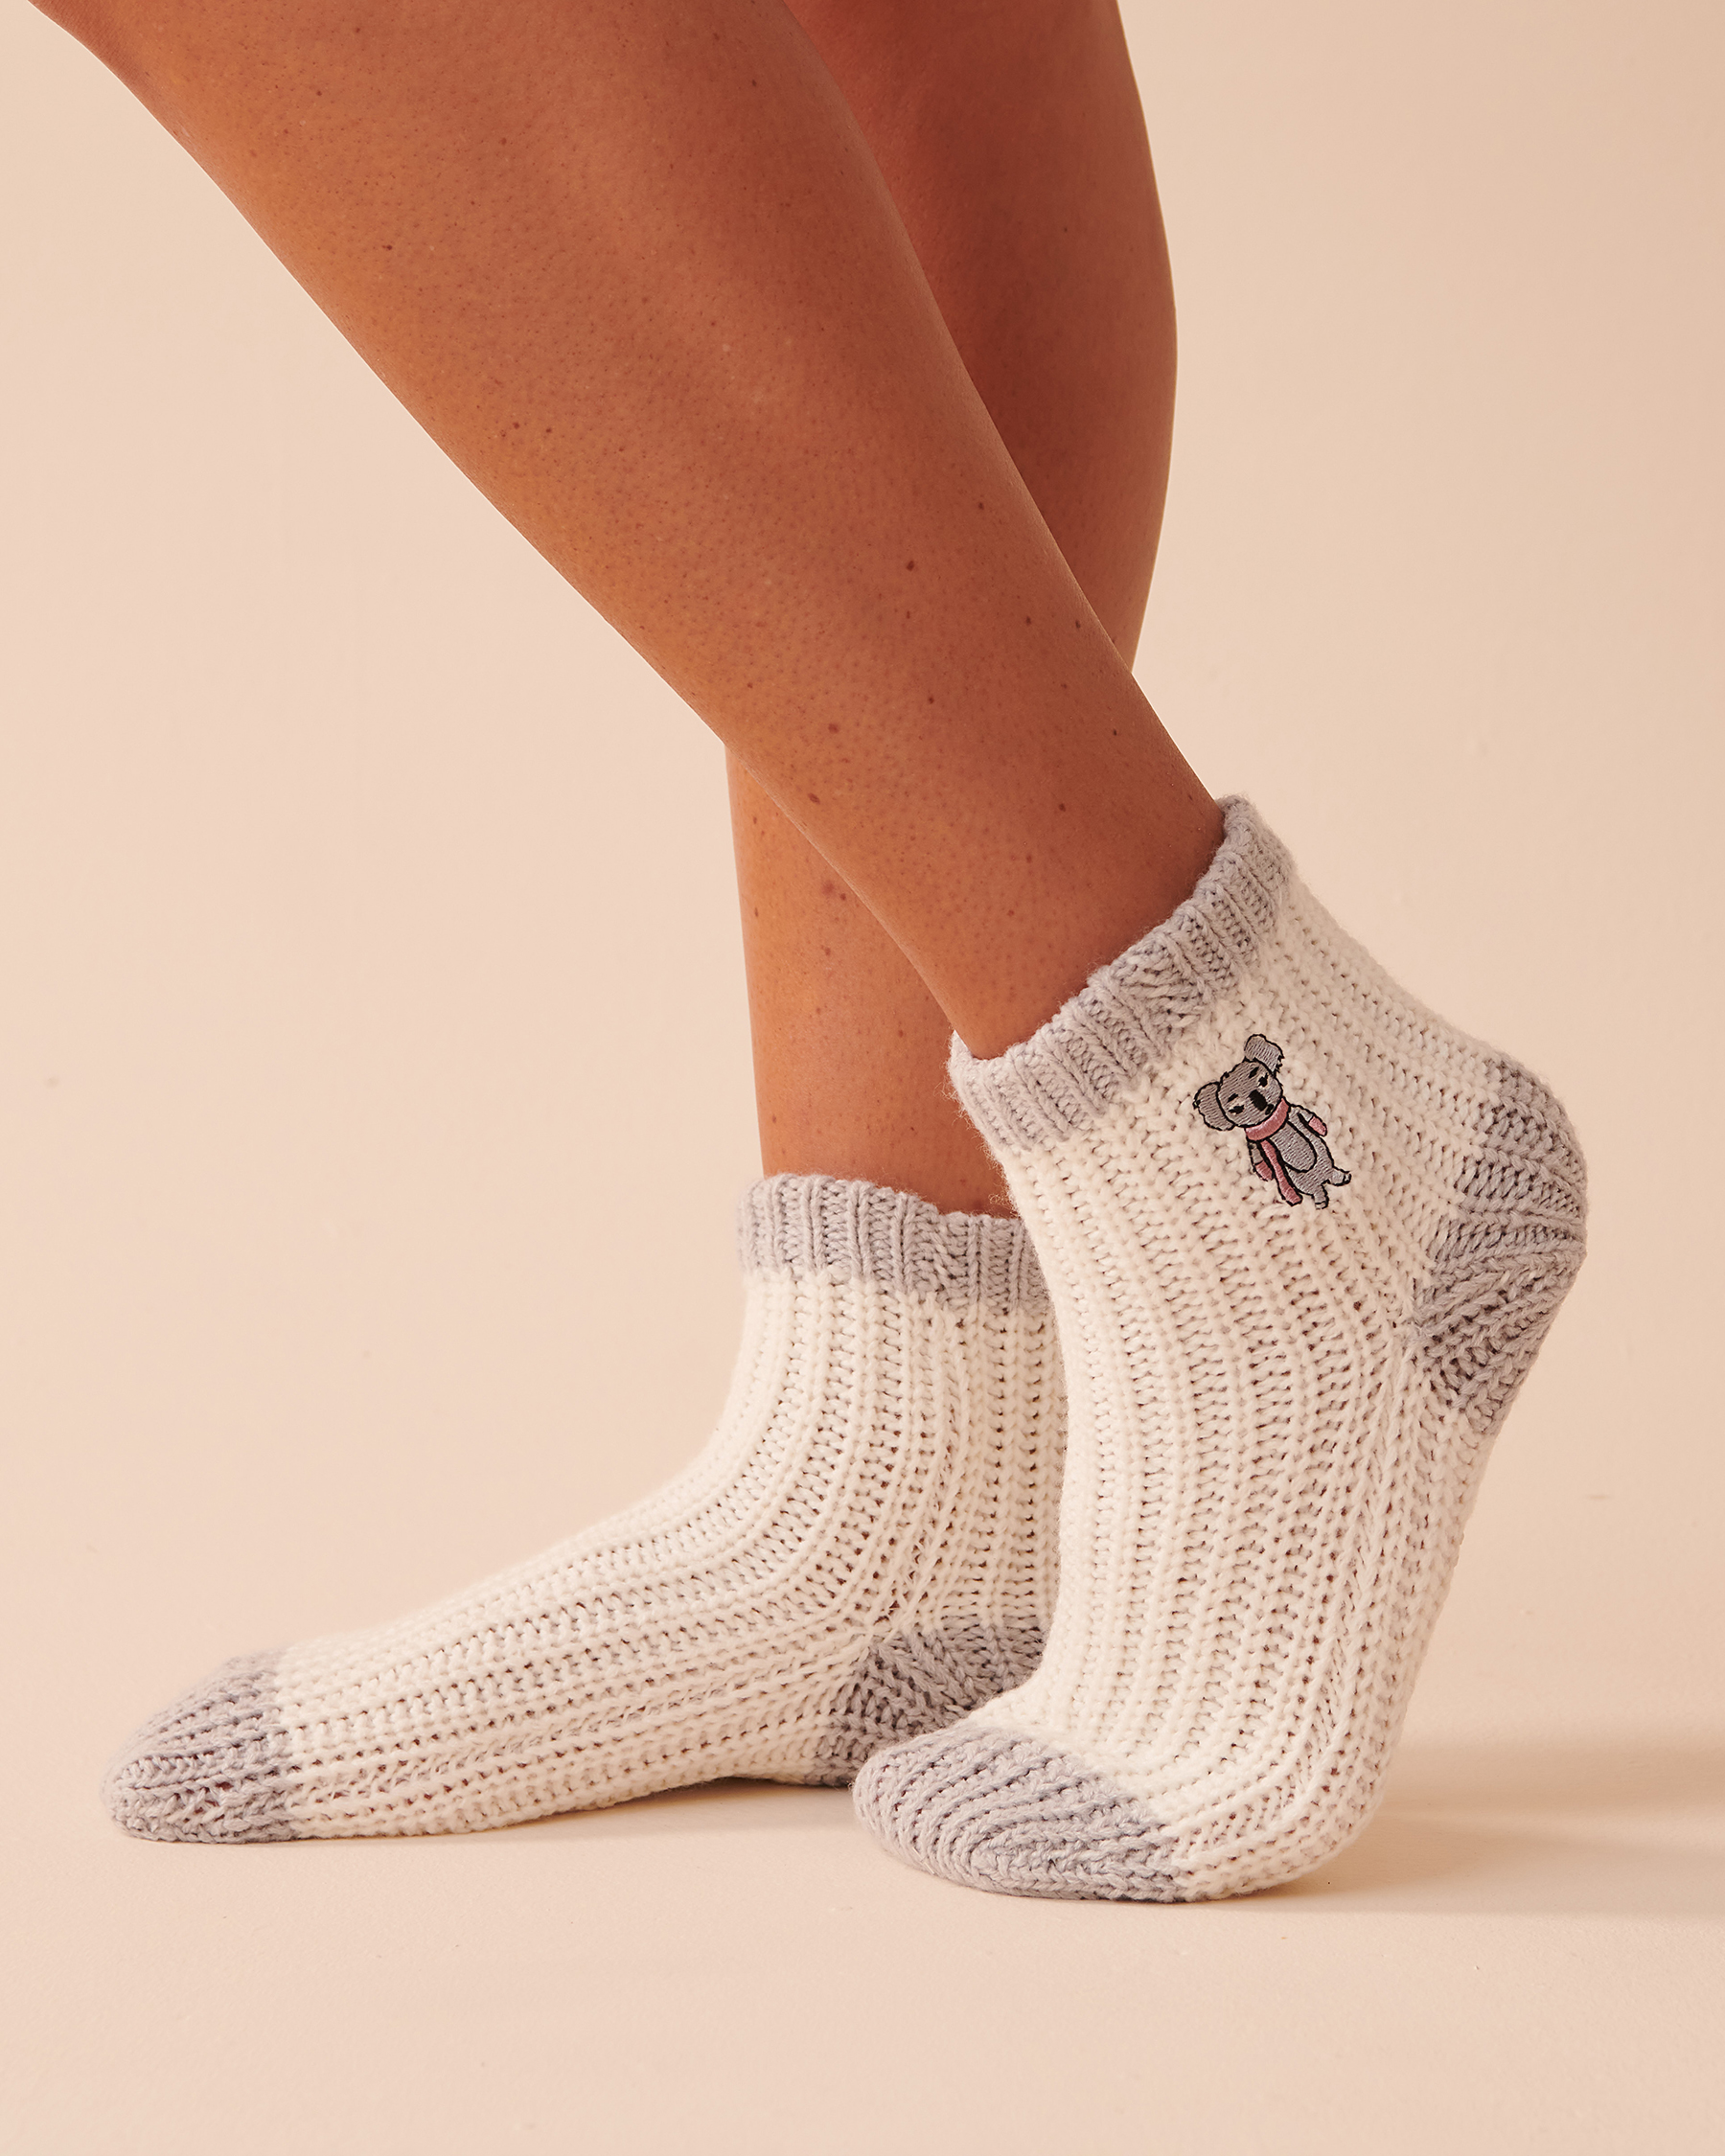 LA VIE EN ROSE Knitted Socks with Winter Embroidery Snow White 40700295 - View1